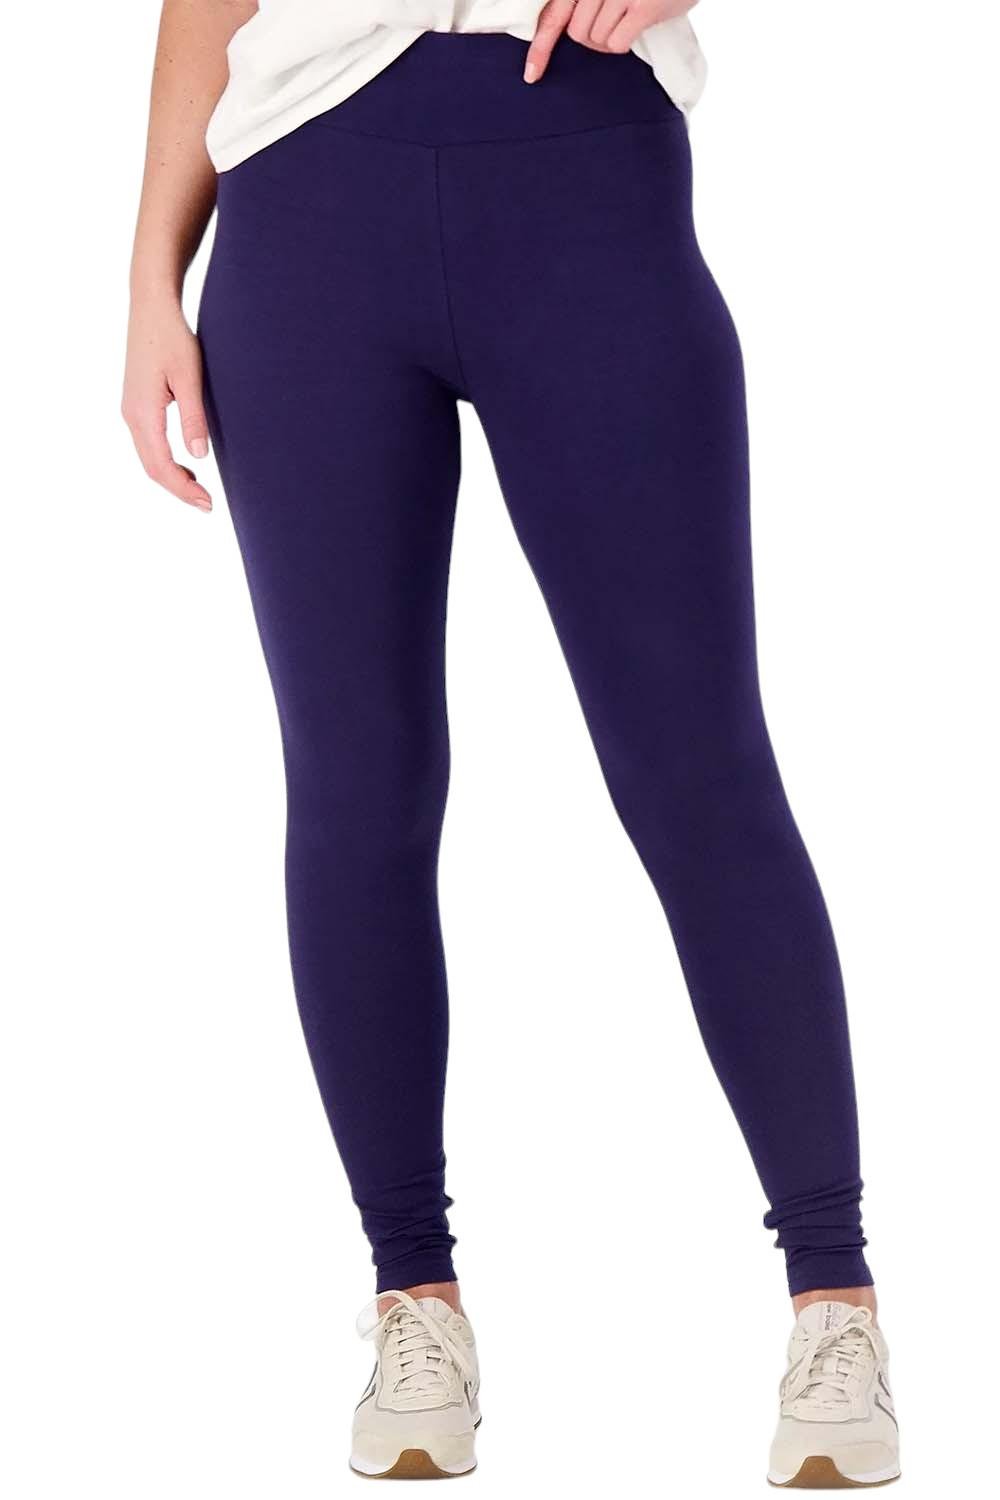 LOGO Layers by Lori Goldstein Knit Pull-On Ankle Leggings 